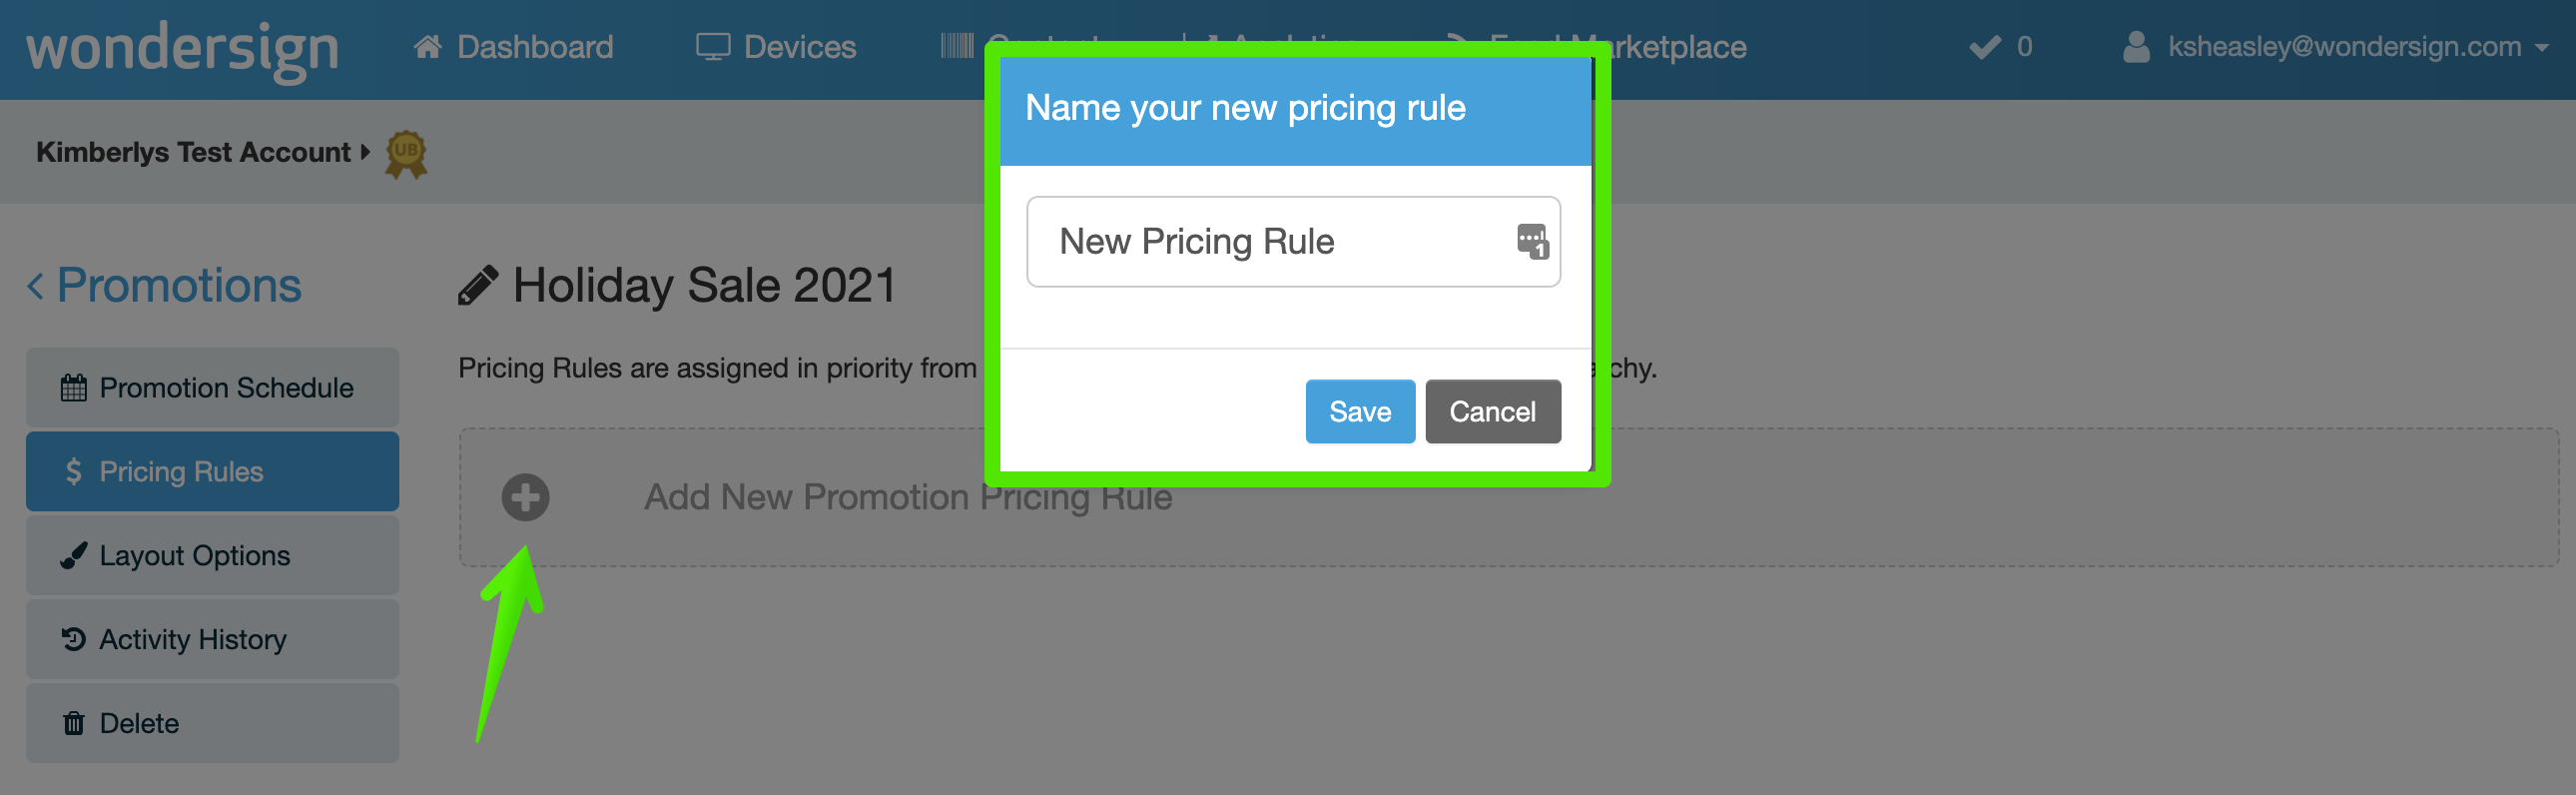 5_click_add_new_pricing_rule_and_enter_name_for_rule.png